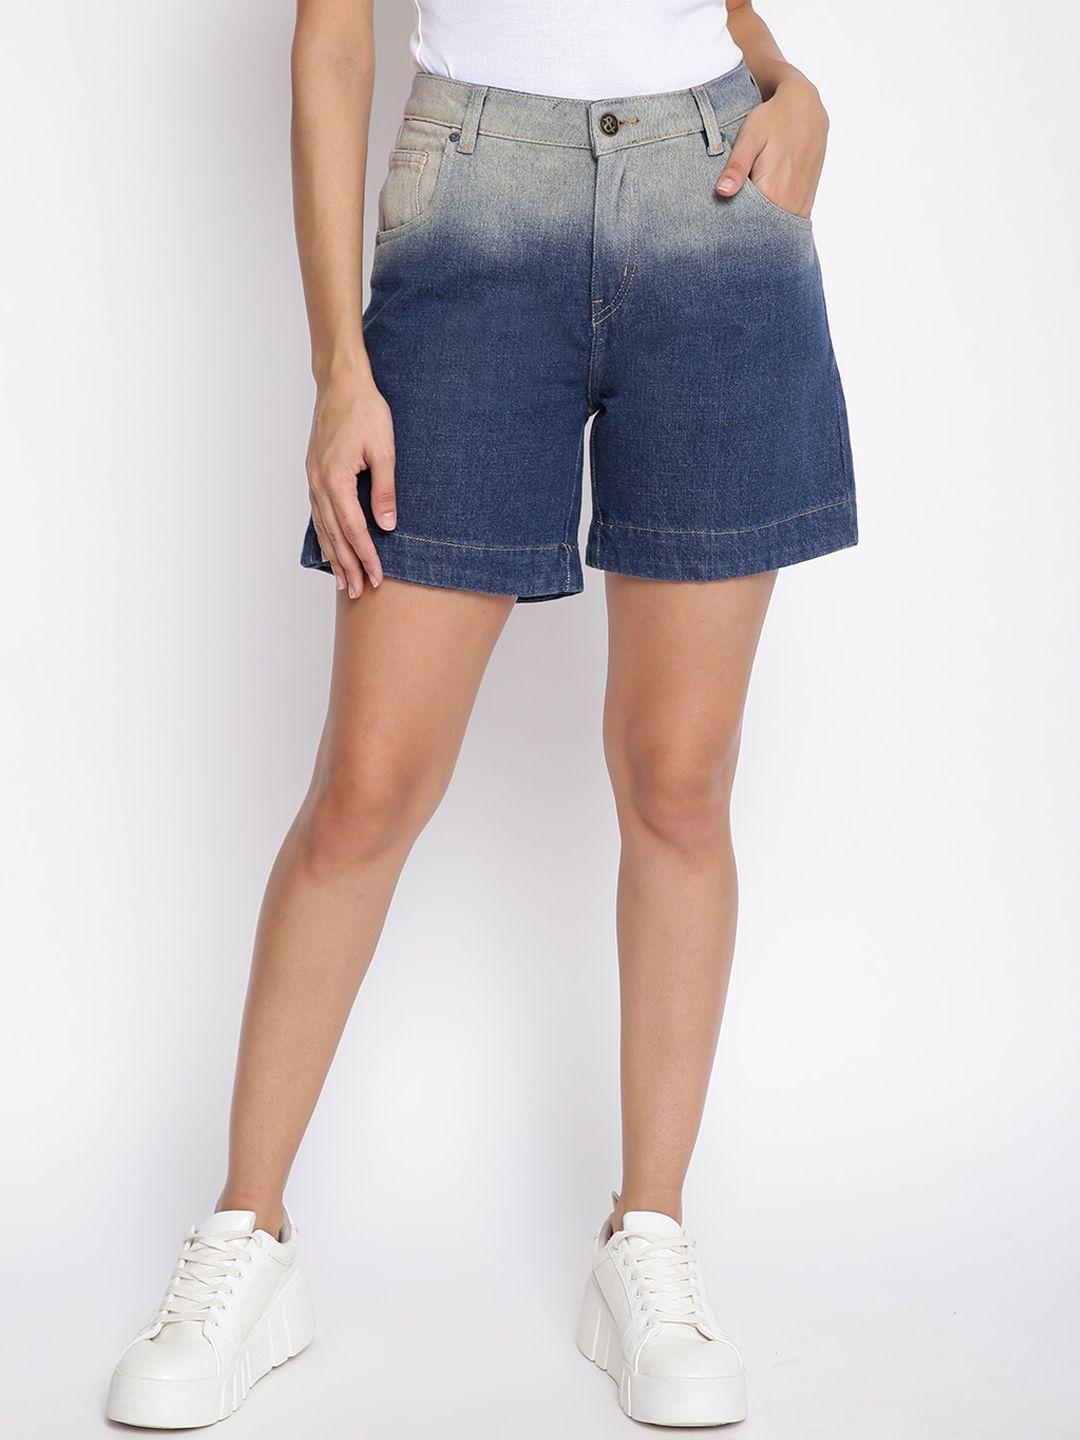 tales & stories women washed outdoor denim shorts